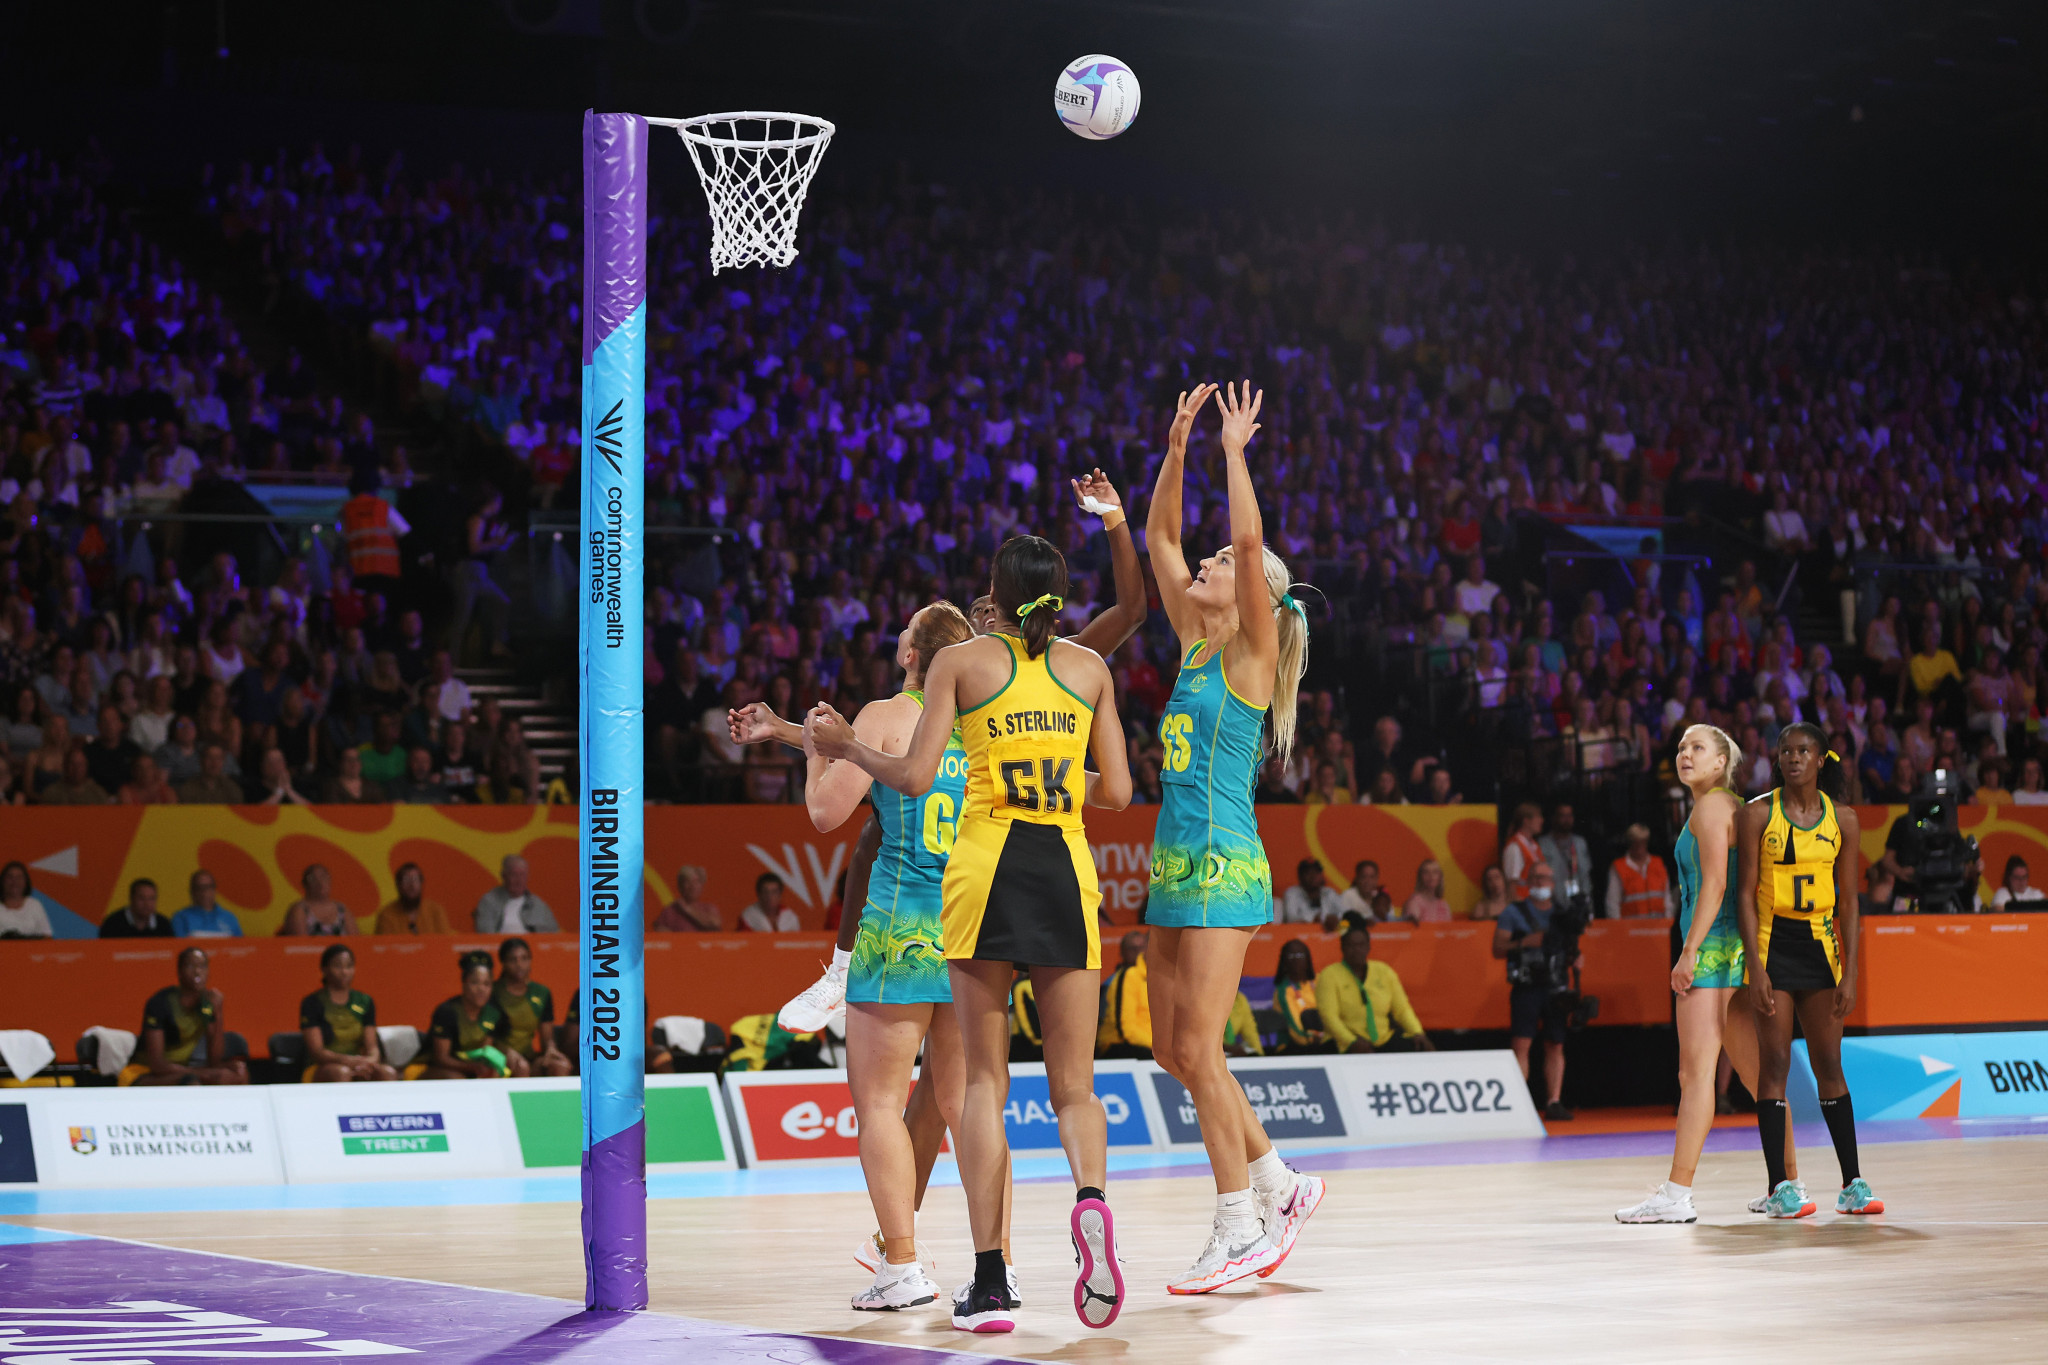 The largest chunk of the AUD$17 million investment is set to go towards netball after Australia regained its Commonwealth Games crown at Birmingham 2022 ©Getty Images